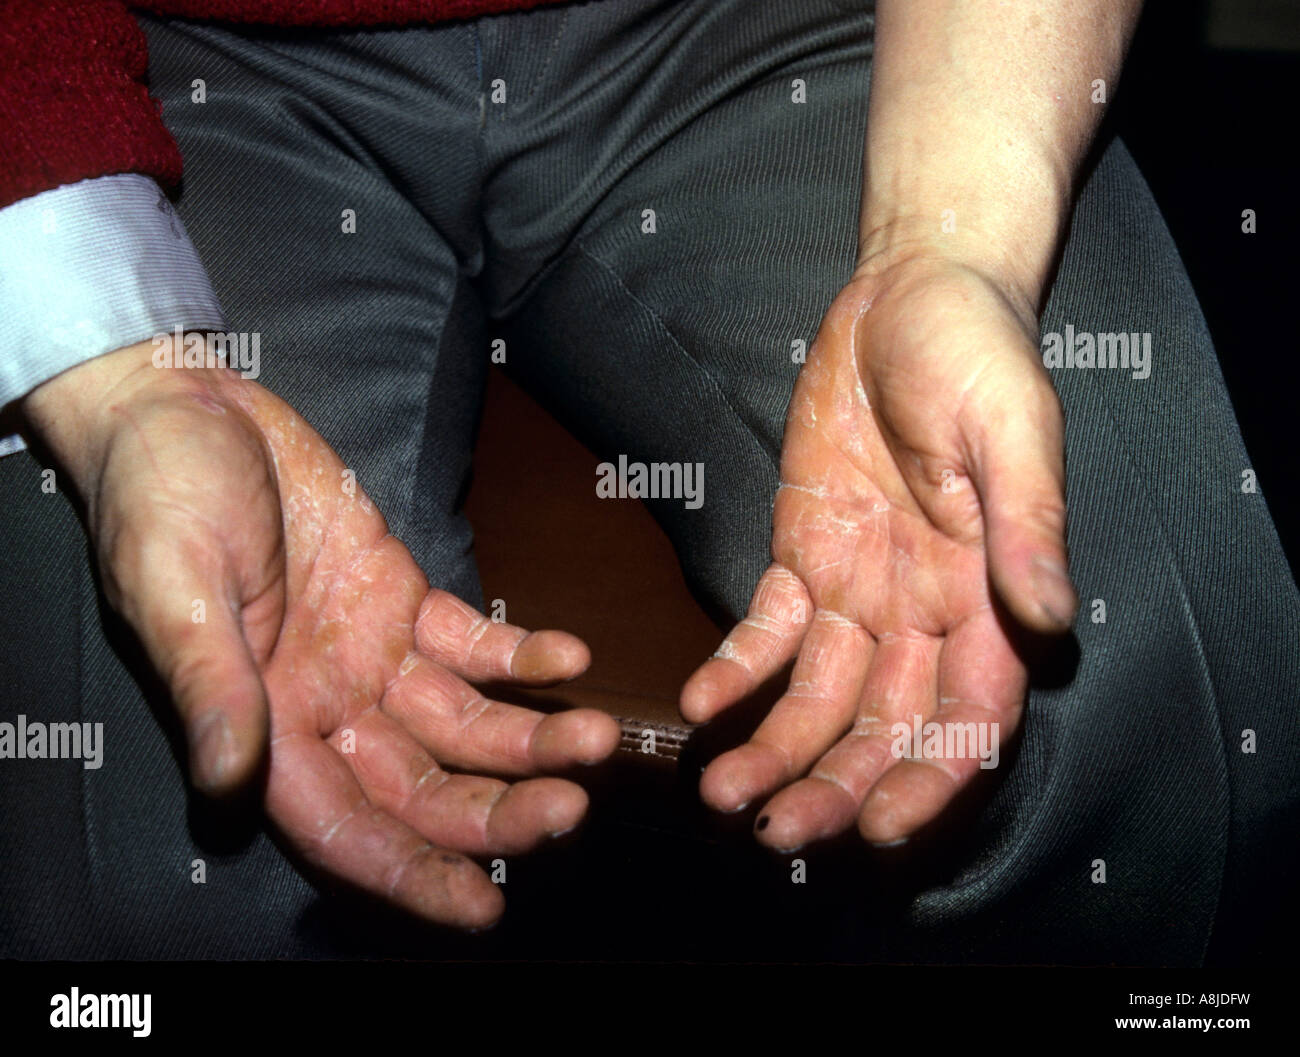 Ringworm of the hands (tinea manus) particularly the palms and the spaces between the fingers. Stock Photo